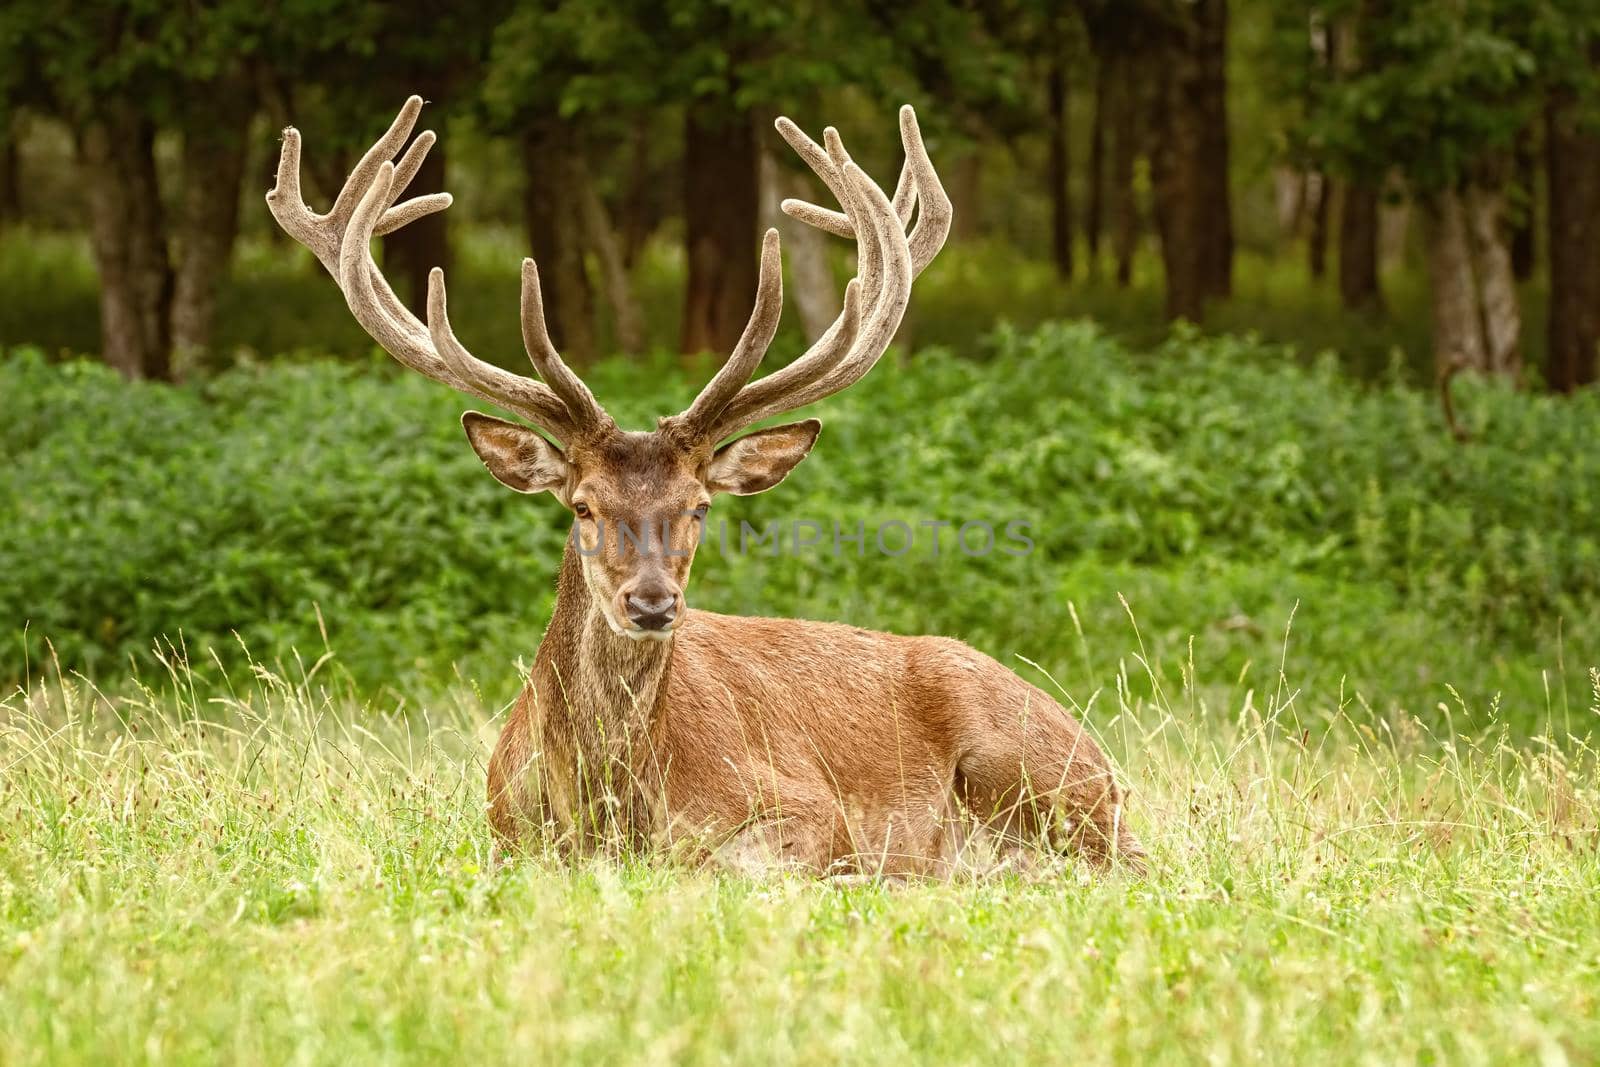 Portrait of a deer with big horns near the forest